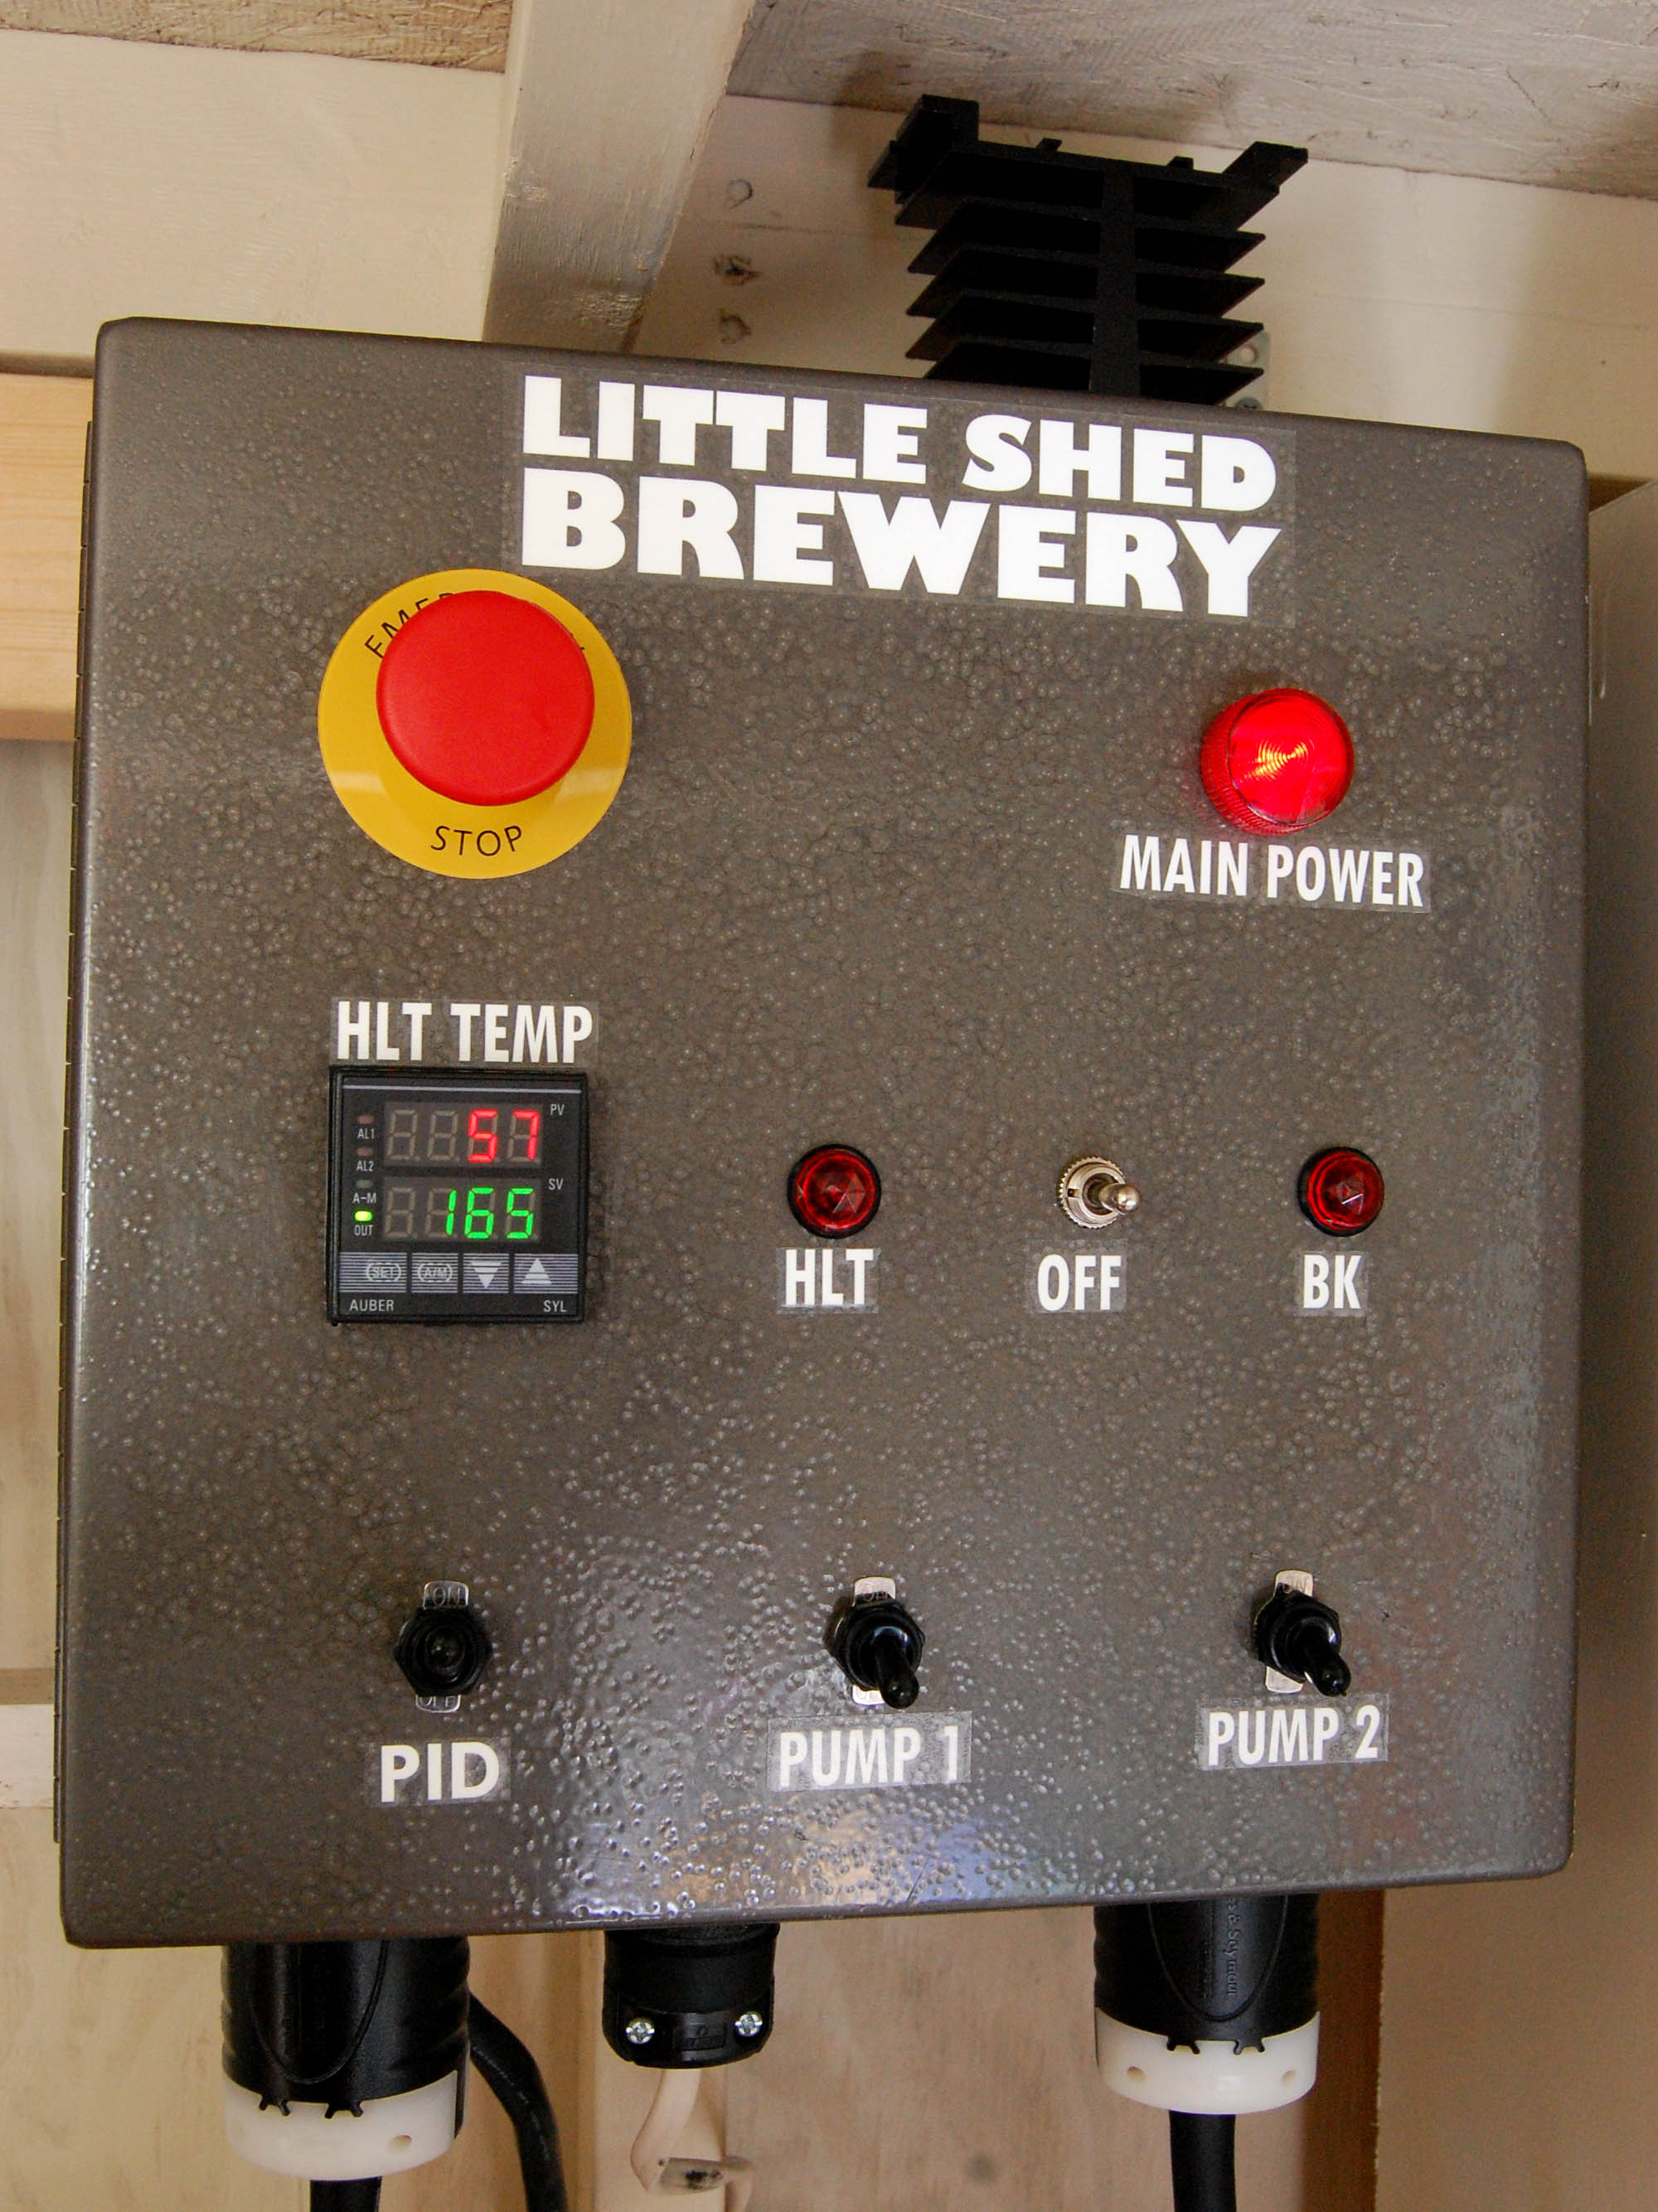 bigljd | Little Shed Brewery plc panel wiring diagram 